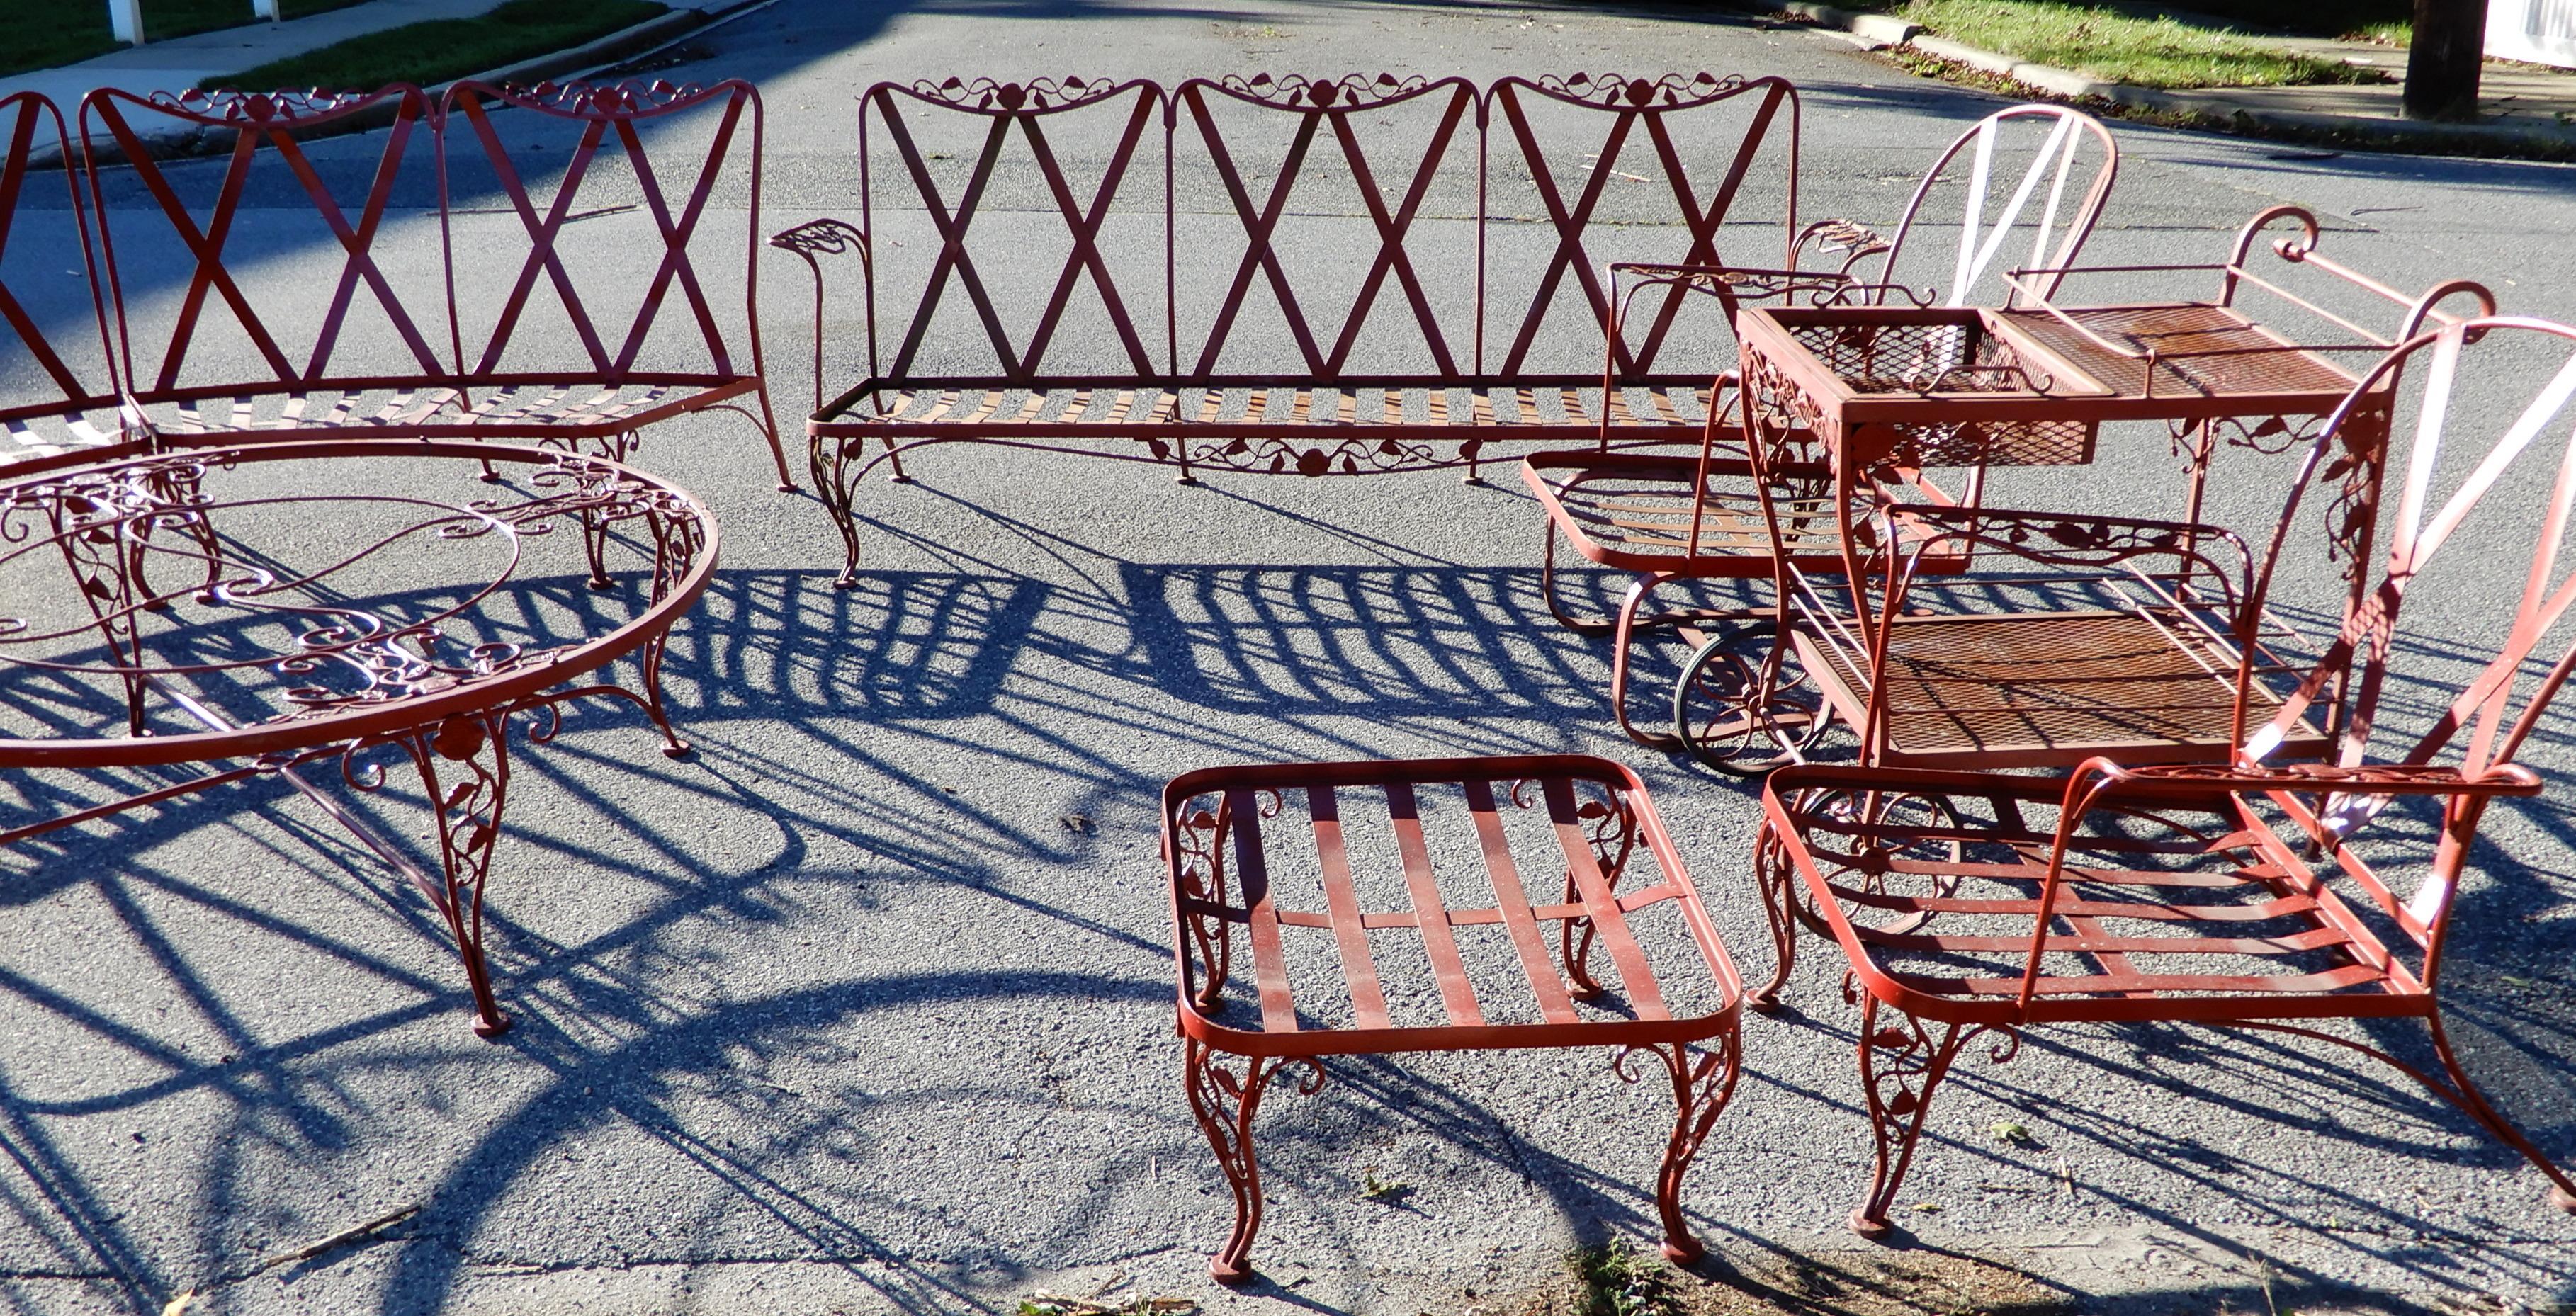 A vintage Woodard Chantilly rose wrought iron patio set. This extensive Woodard patio set consists of a 1-piece sofa, a curved 3-piece sofa, a 48” round glass top coffee table, a footstool, a pair of armchairs, a teacart, and a glass top side table.